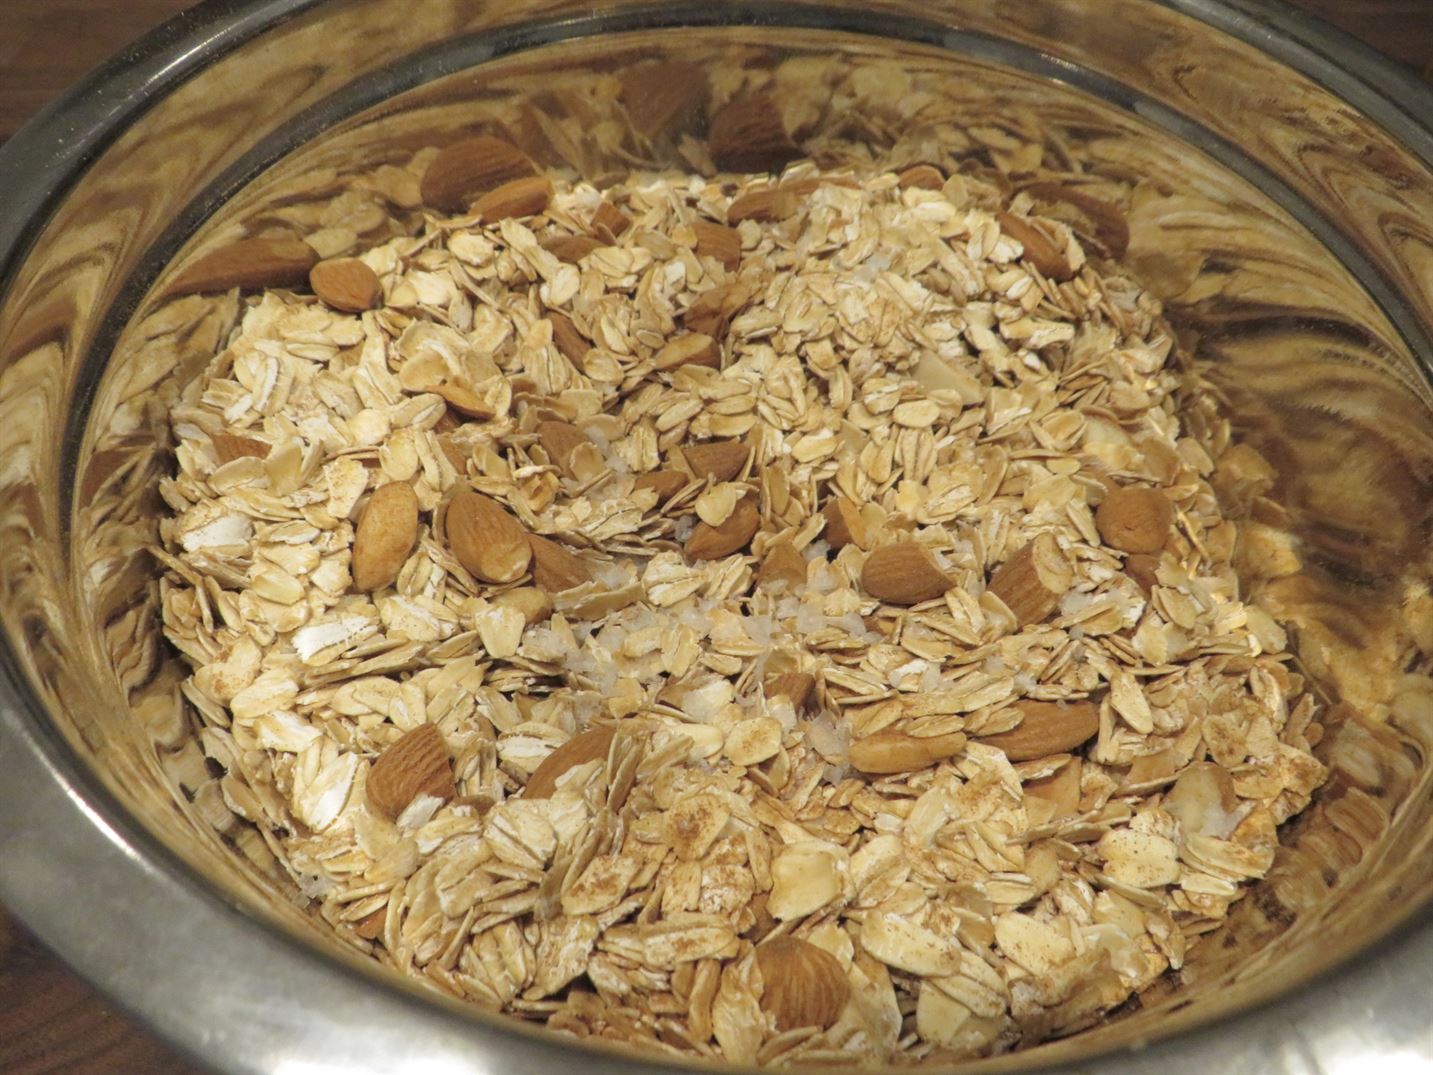 Here are the oats, almonds, and salt.
Courtney Lockwood | The Montclarion